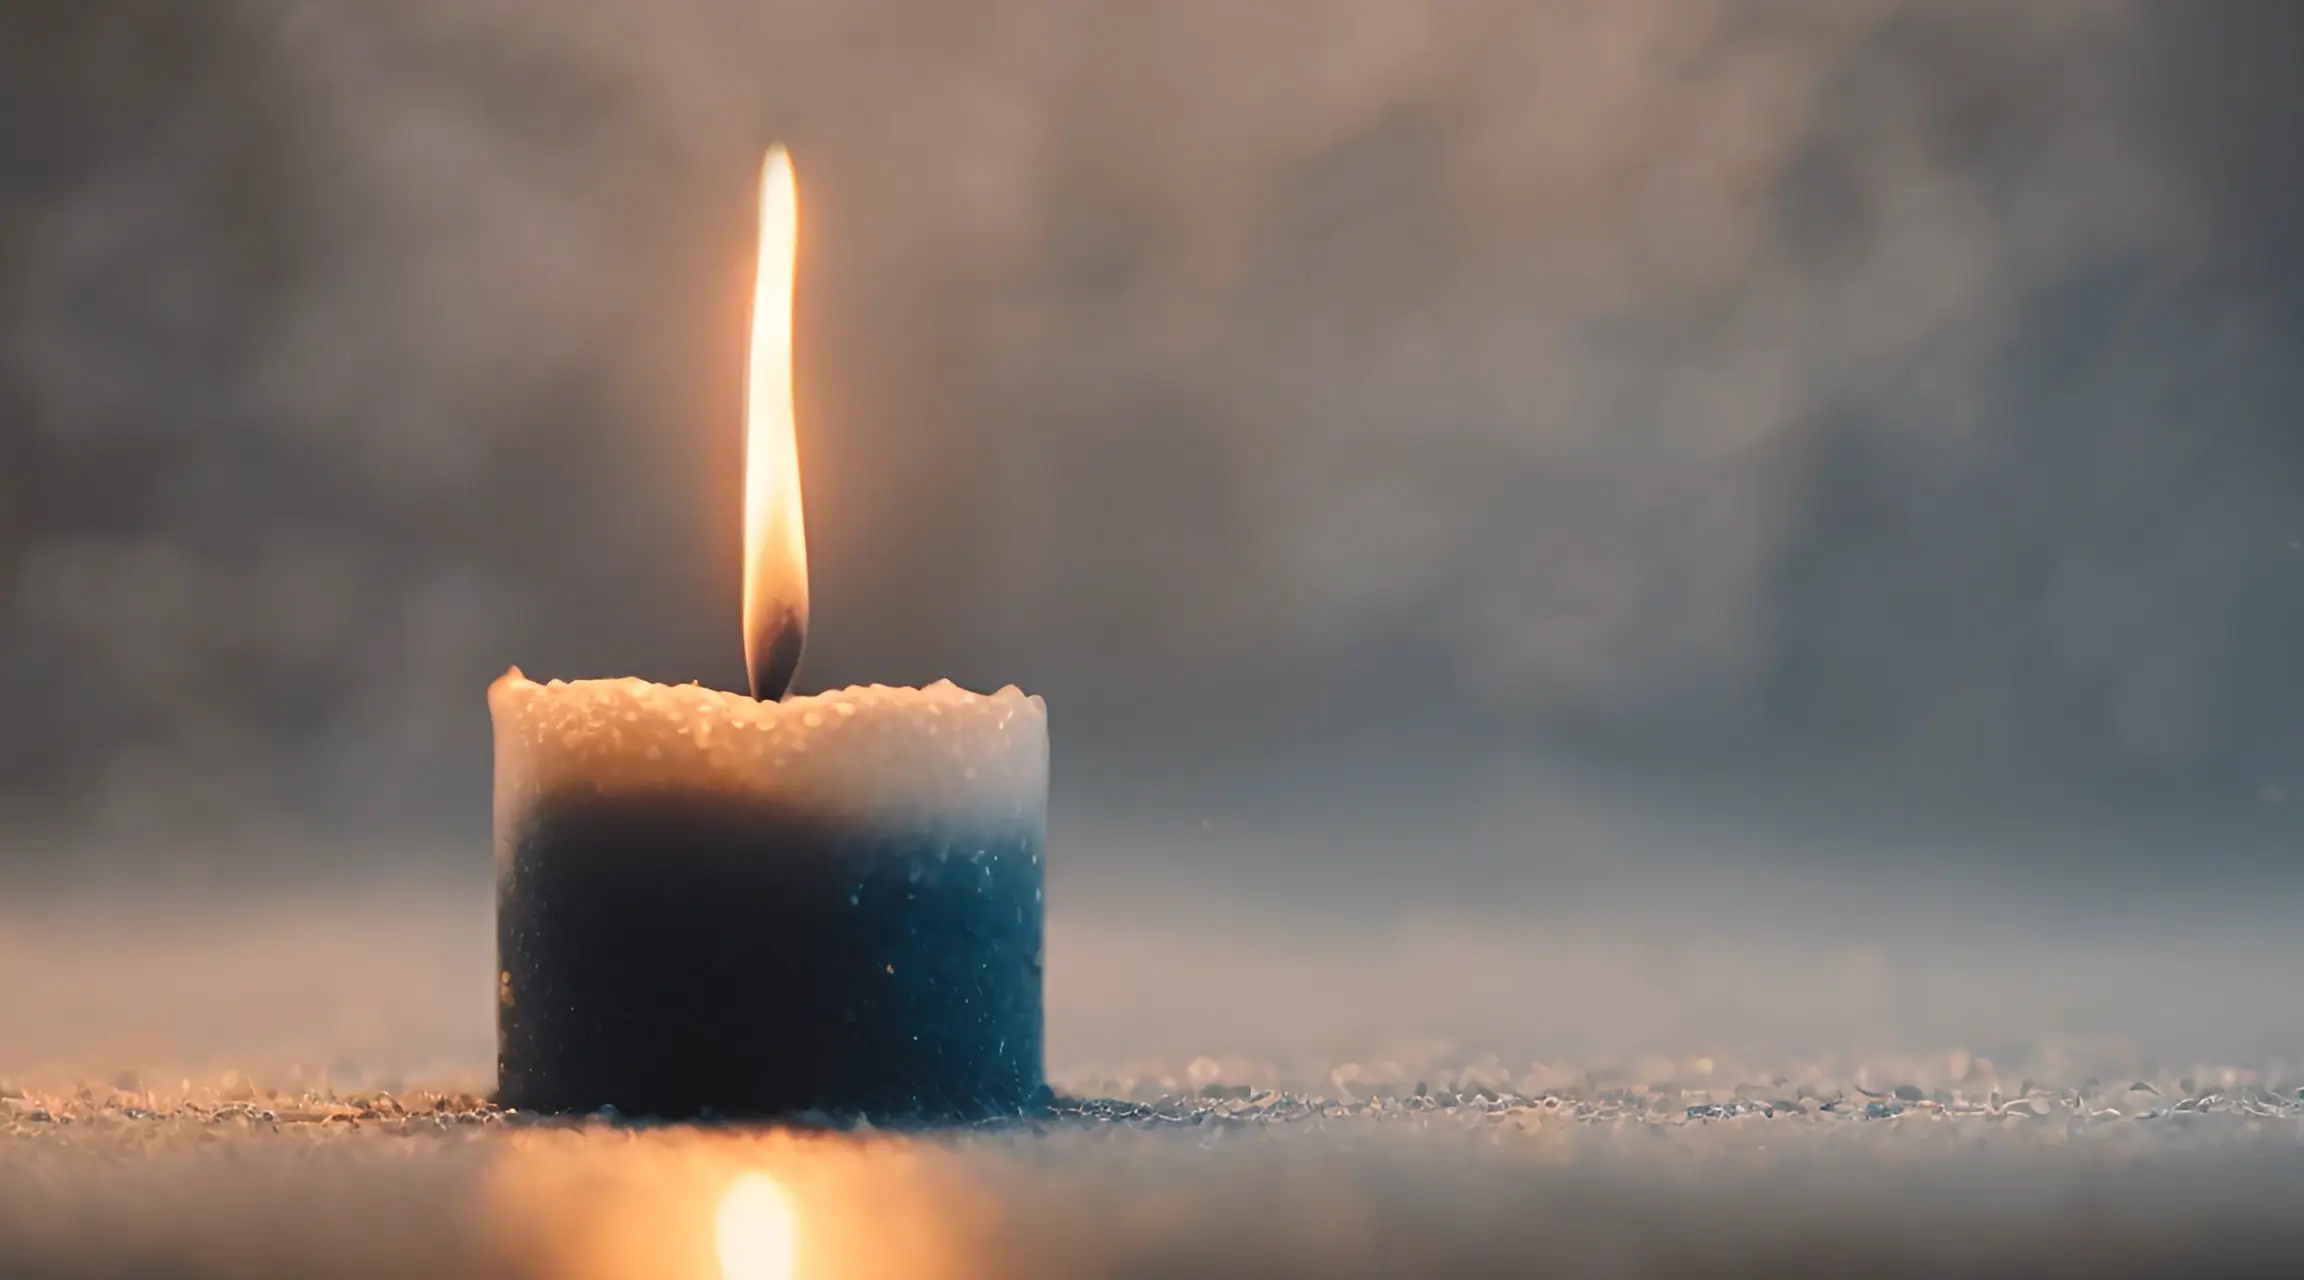 Candlelight Serenity Warm Glow Stock Video